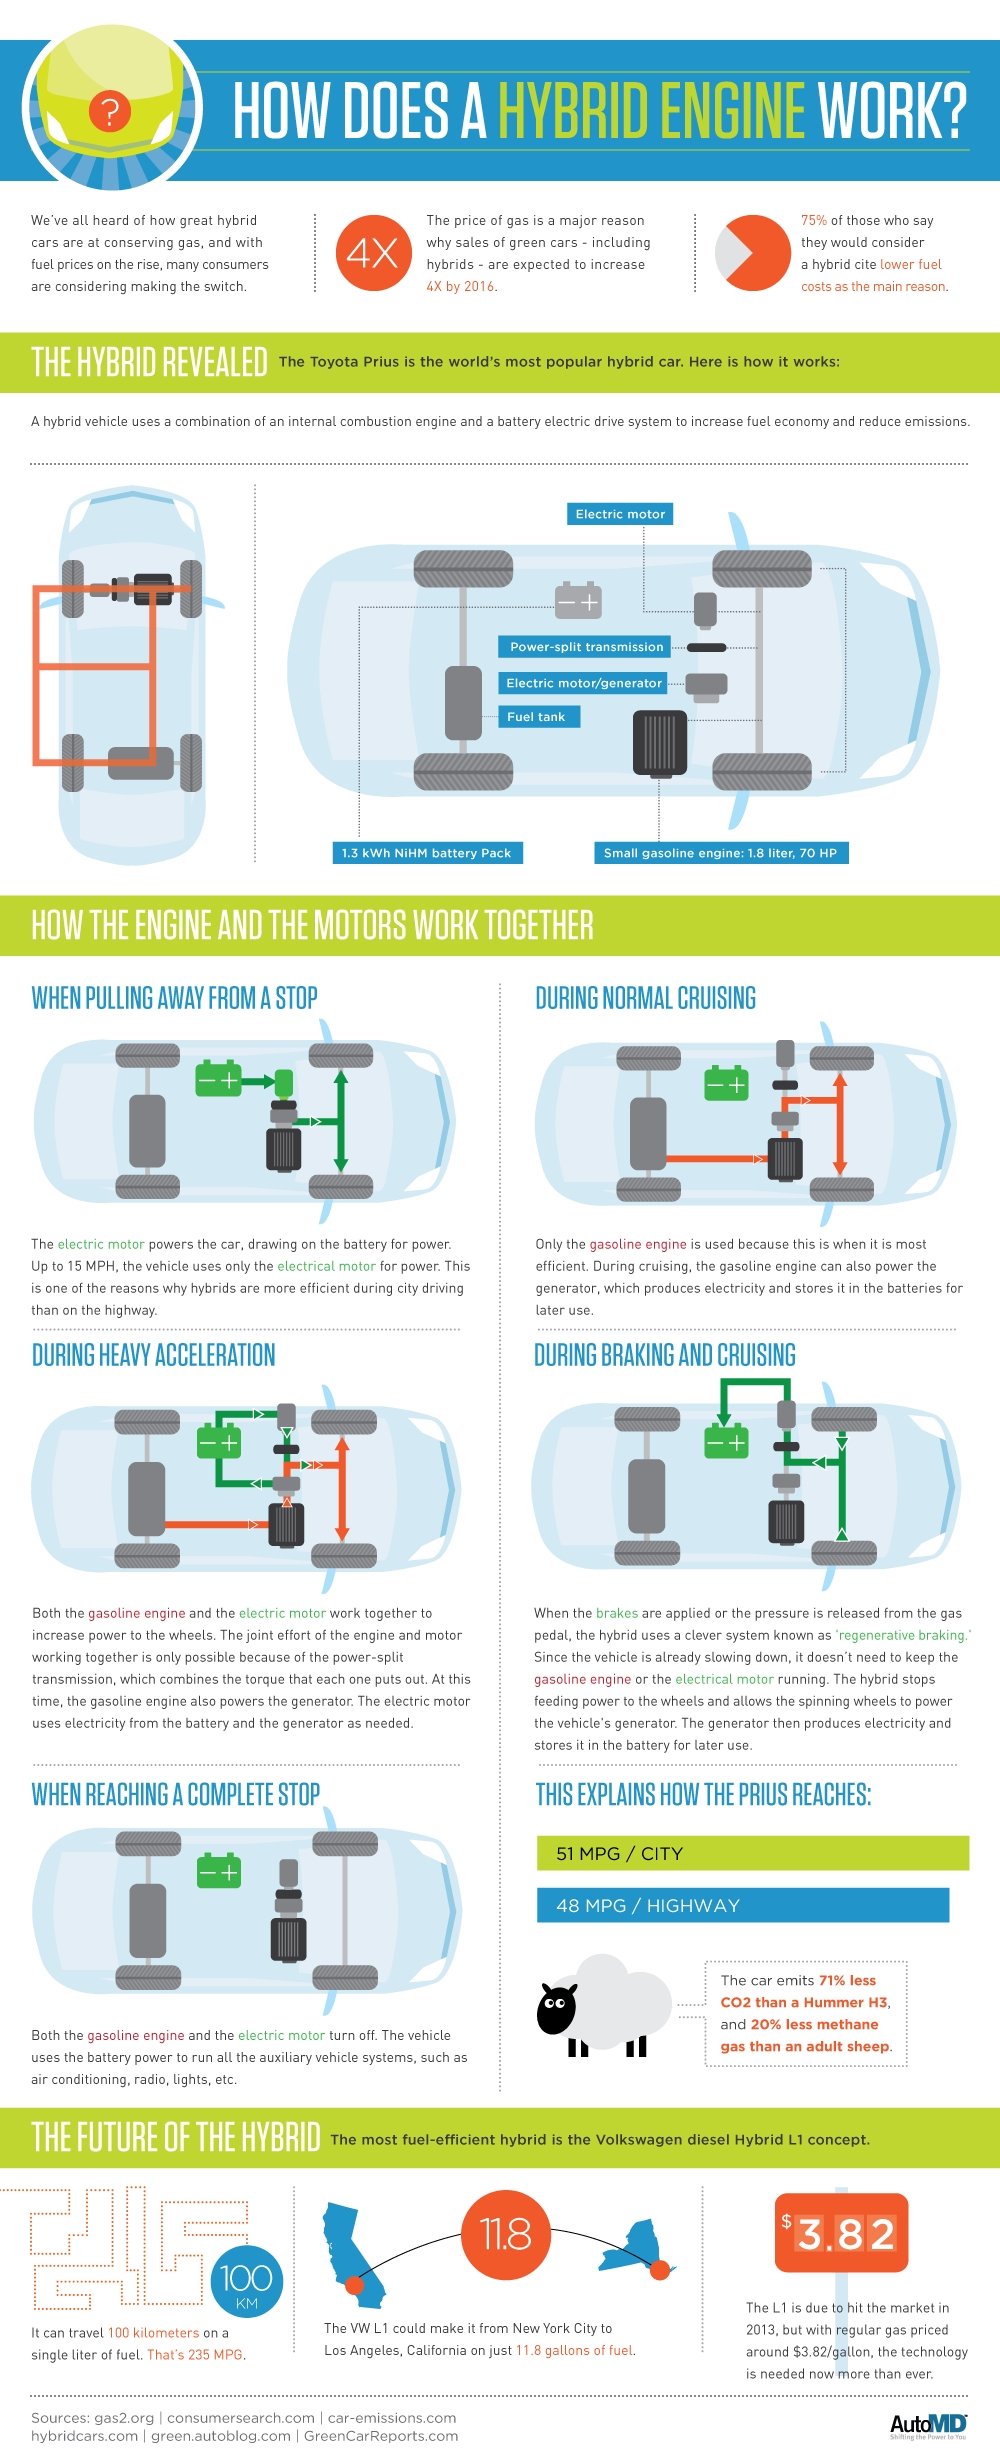 how-a-hybrid-works-infographic-used-courtesy-of-automd_100353583_l (2)